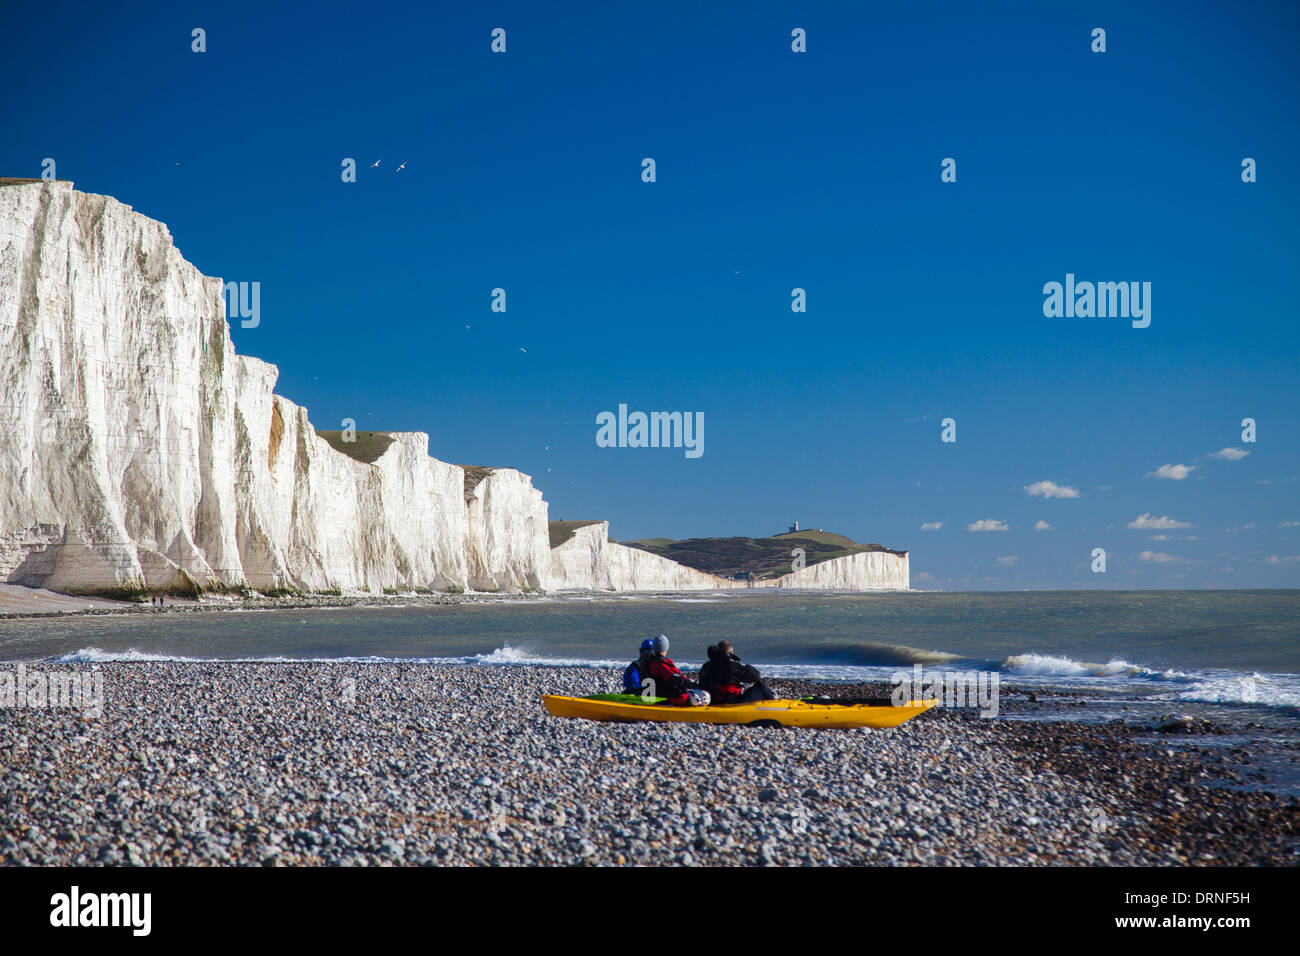 Kayakers at the Seven Sisters, Cuckmere Haven beach, County Sussex, England. Stock Photo